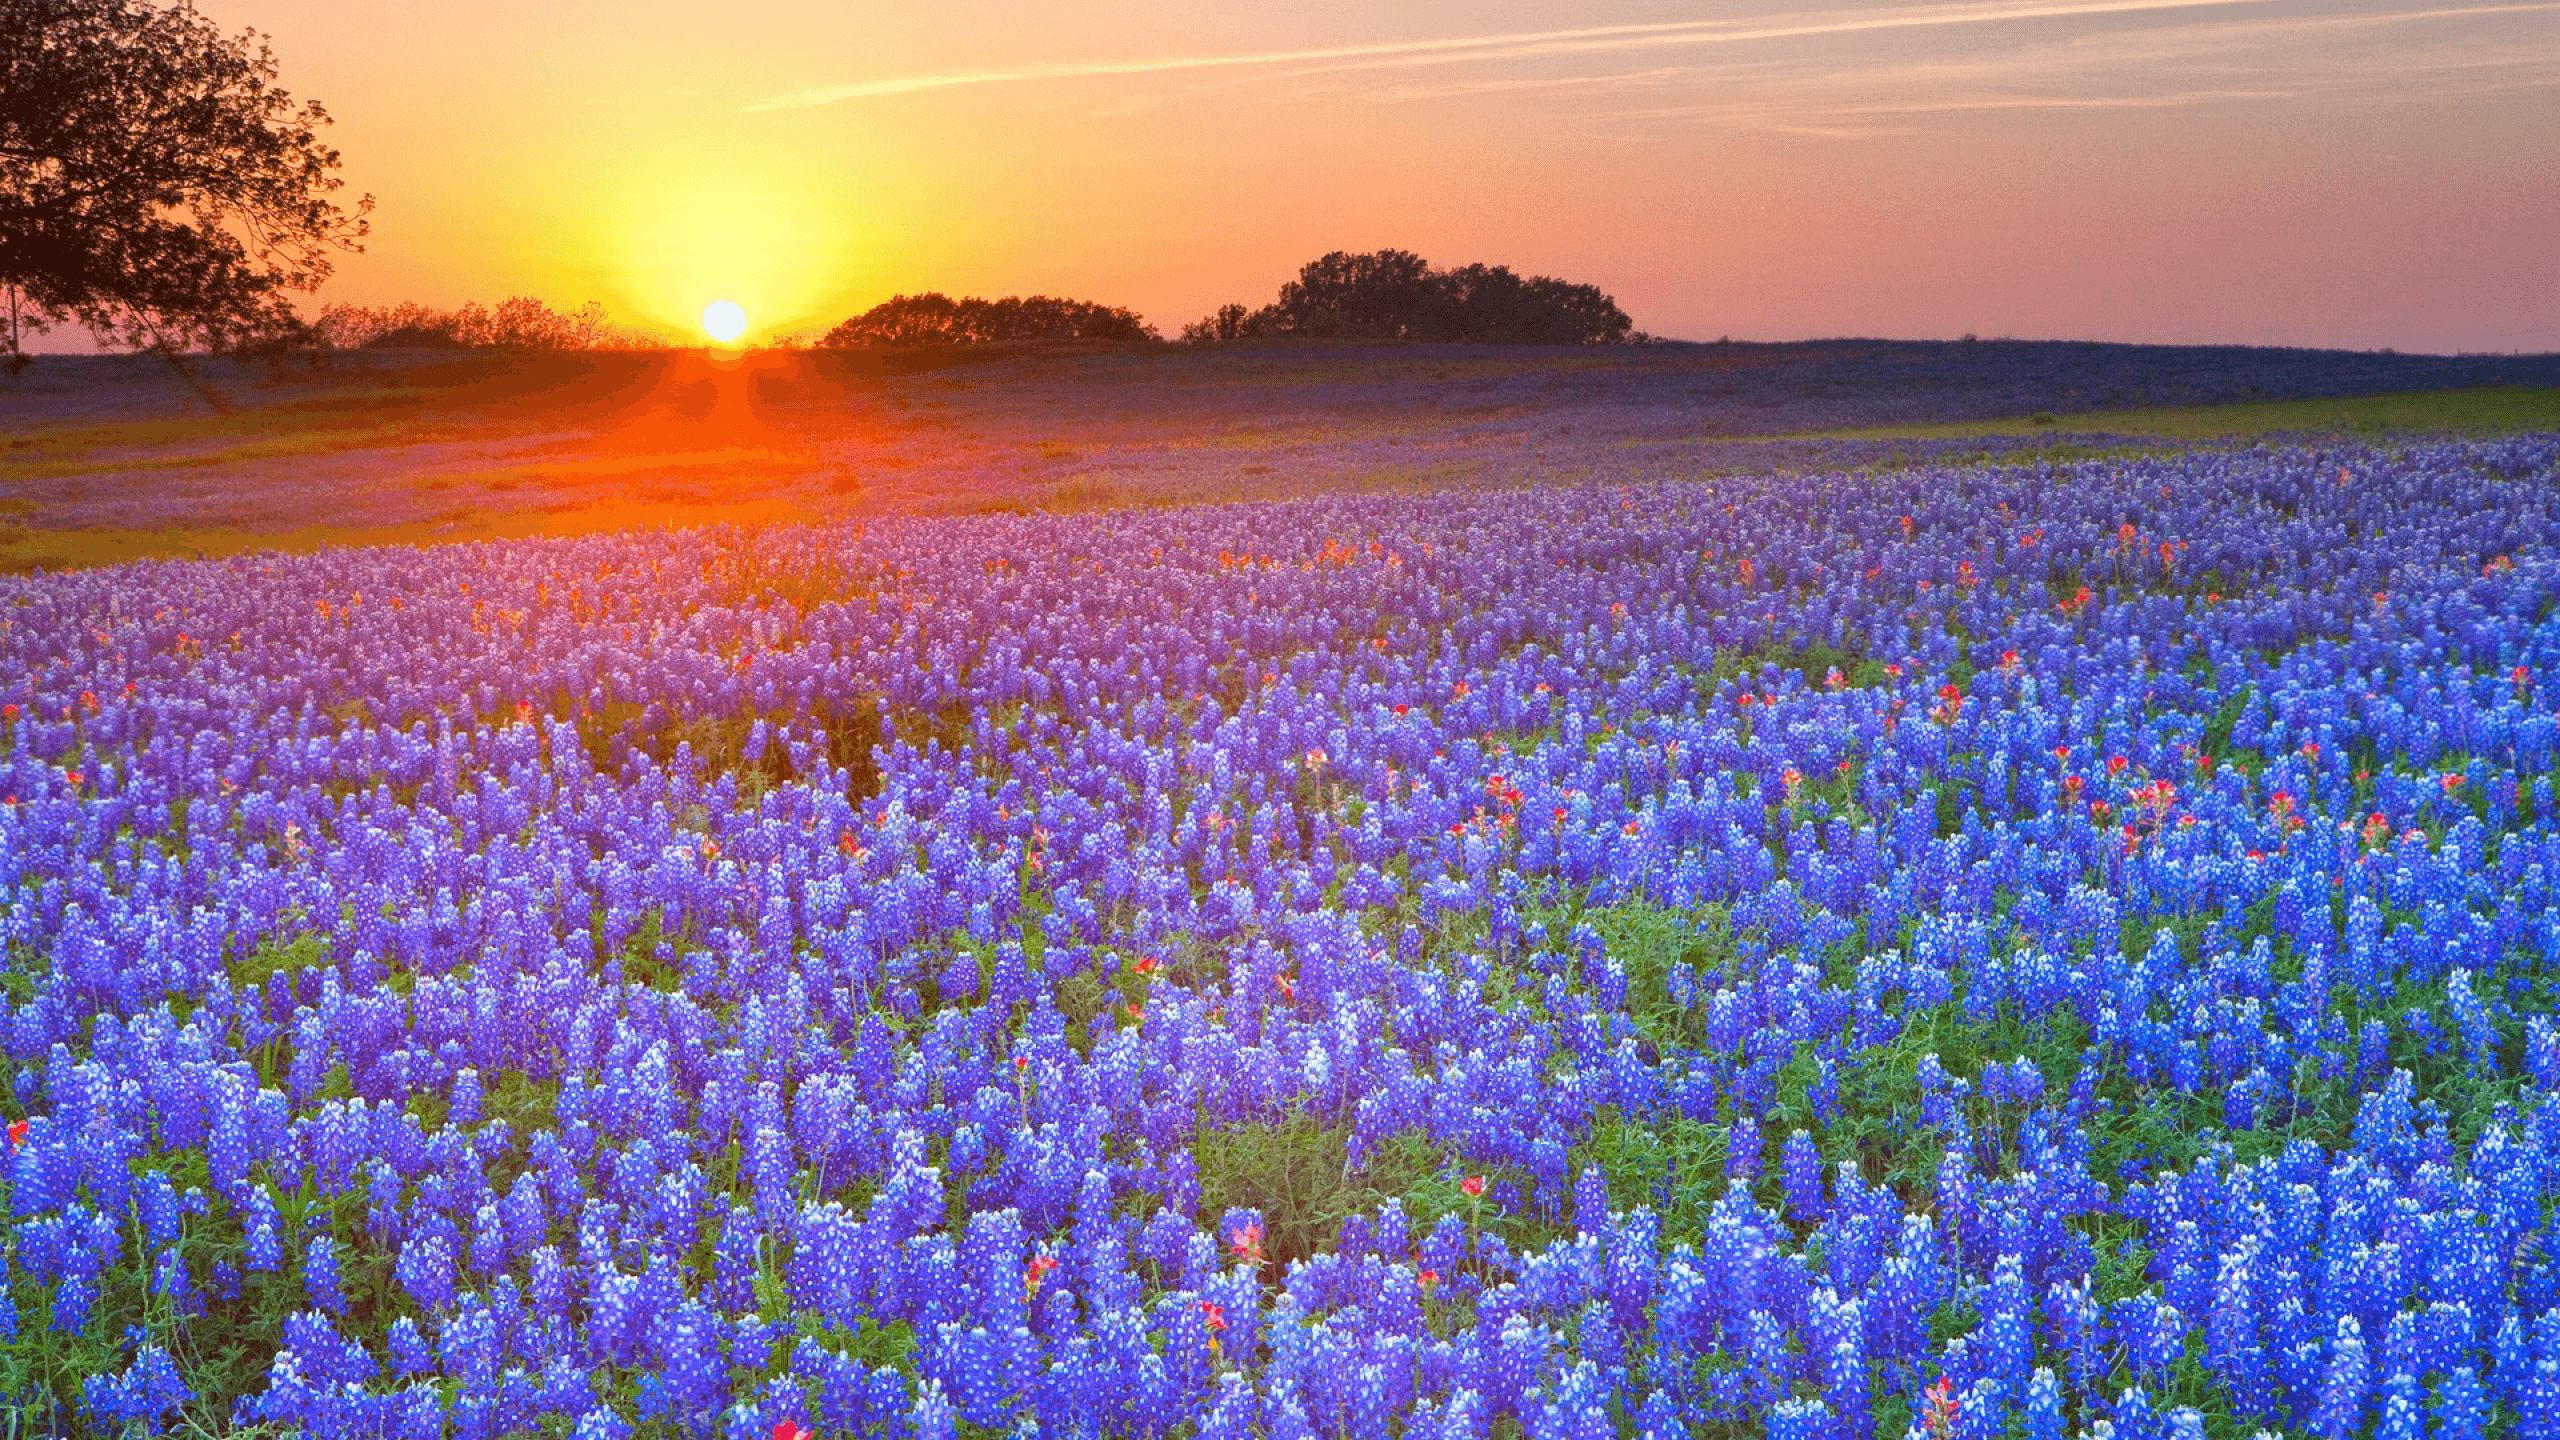 A sunset over the bluebonnets in texas - Texas